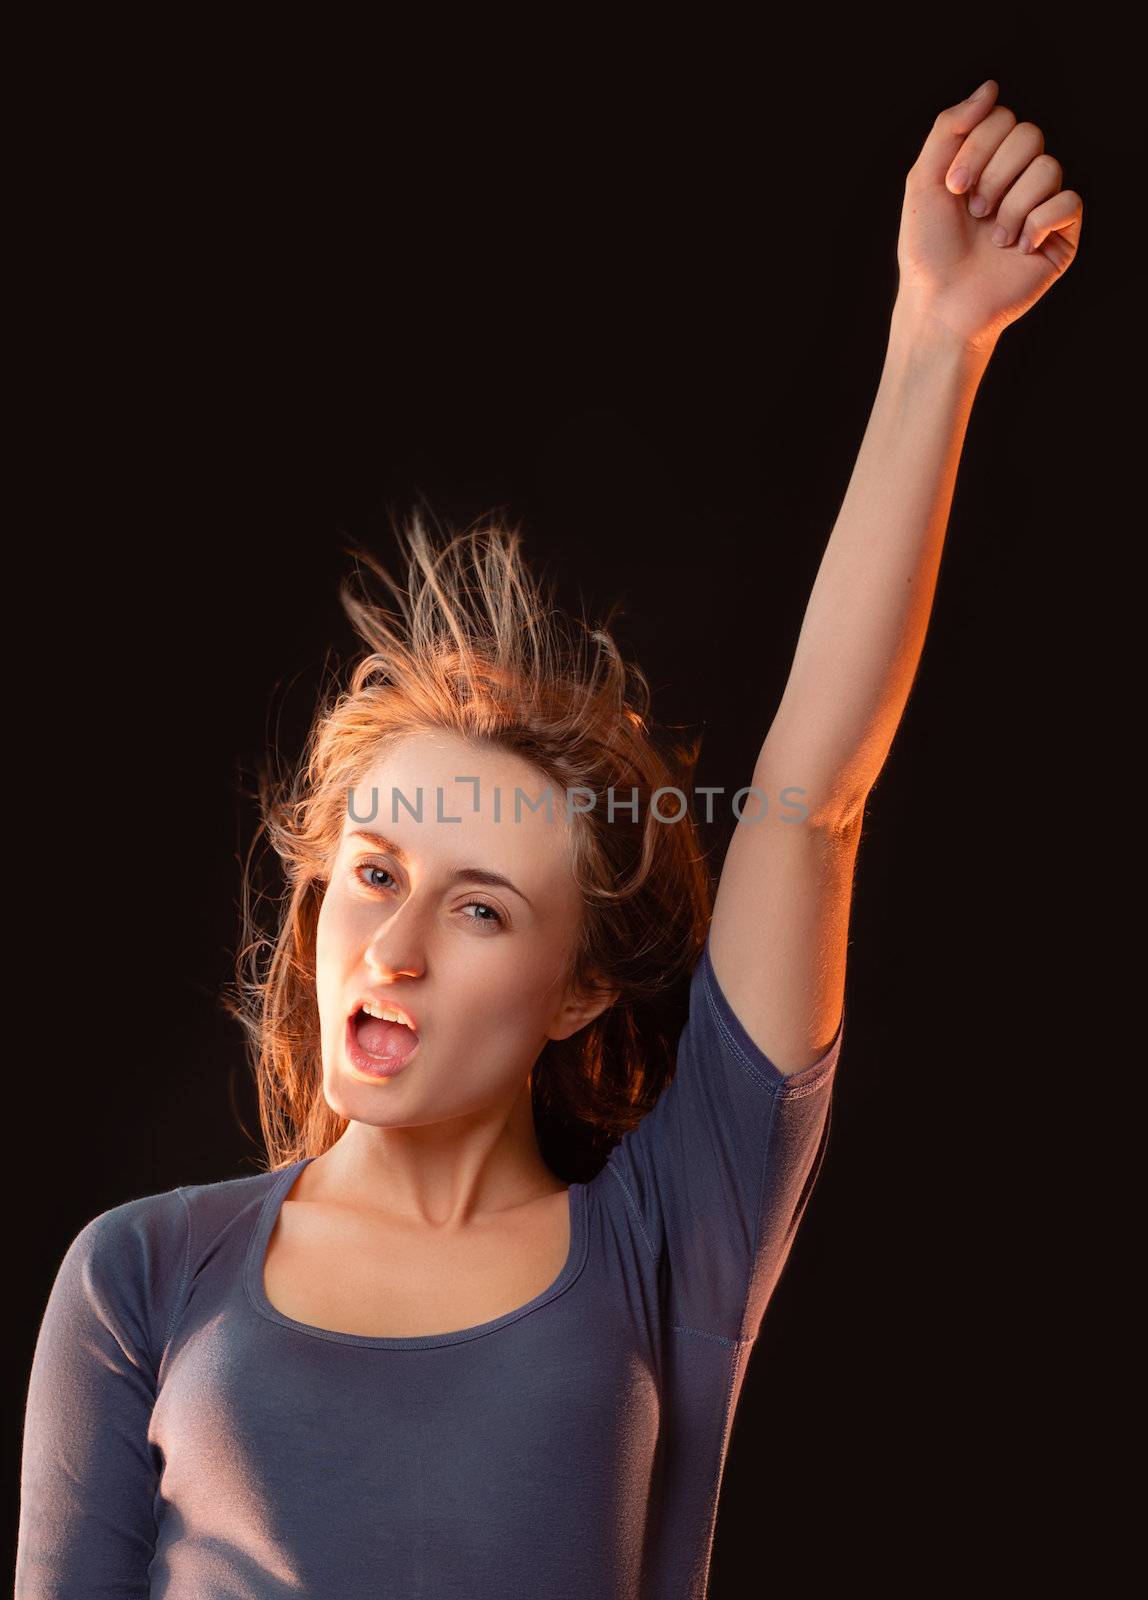 Portrait of emotional girl with her hand raised